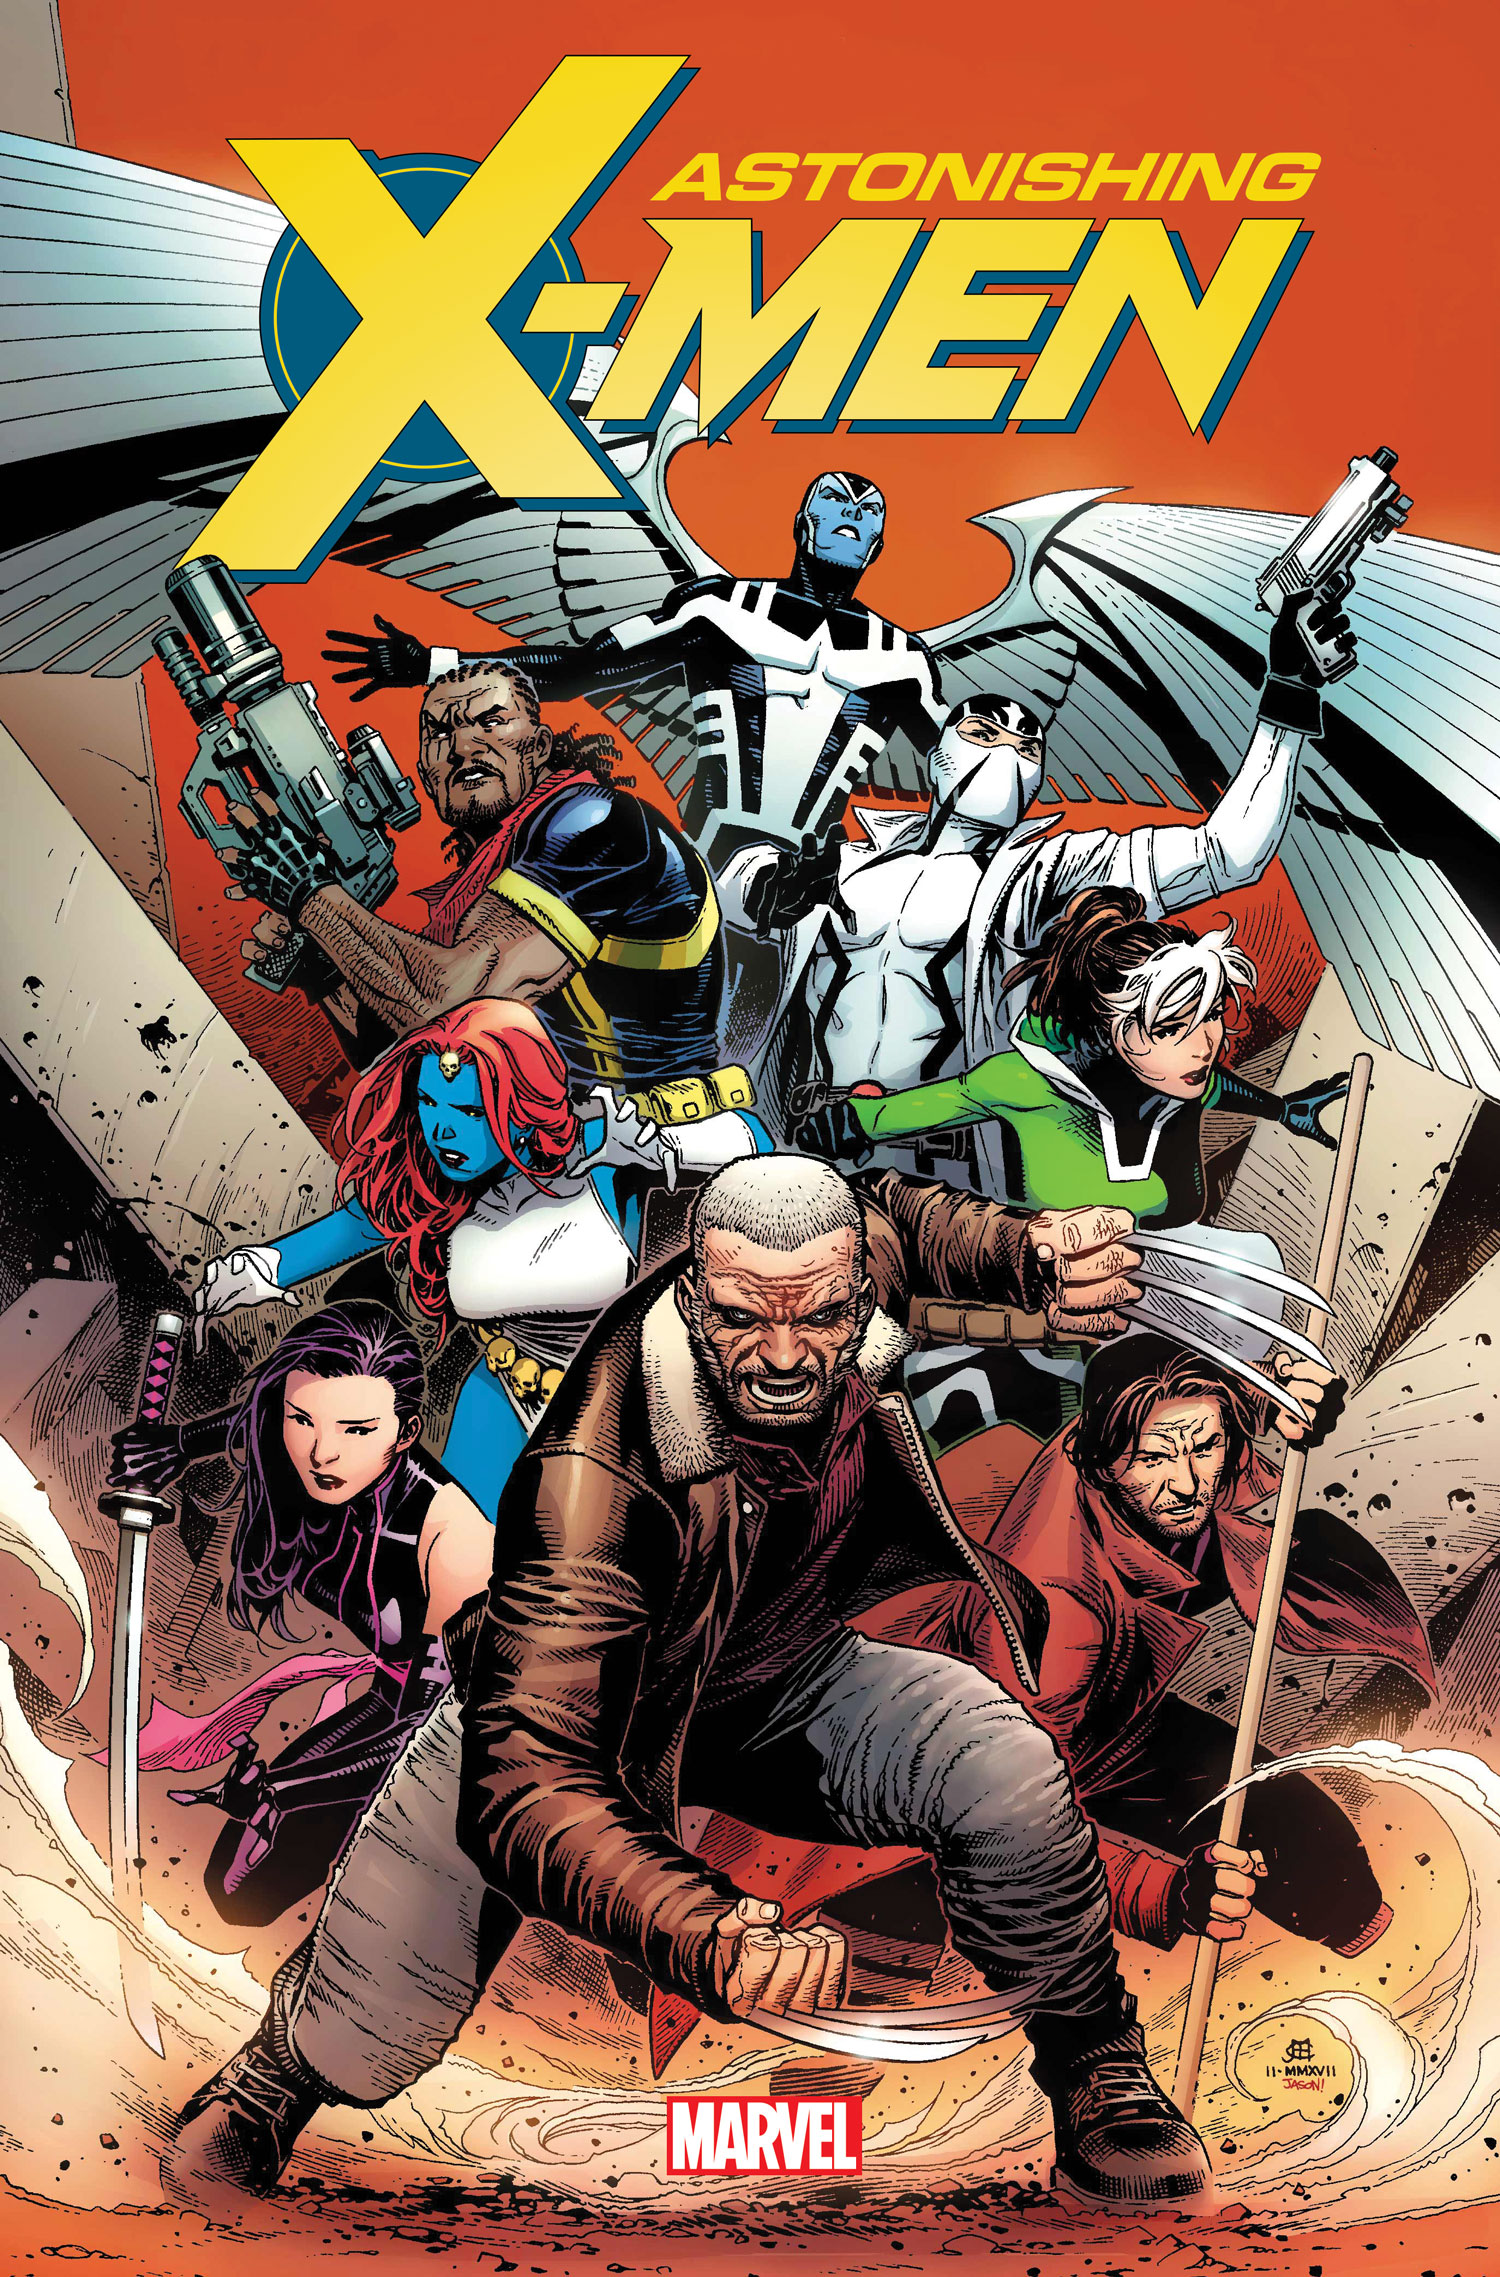 Astonishing X-Men #1 Recruits Superstar Artists For Epic Thrill Ride -  Previews World